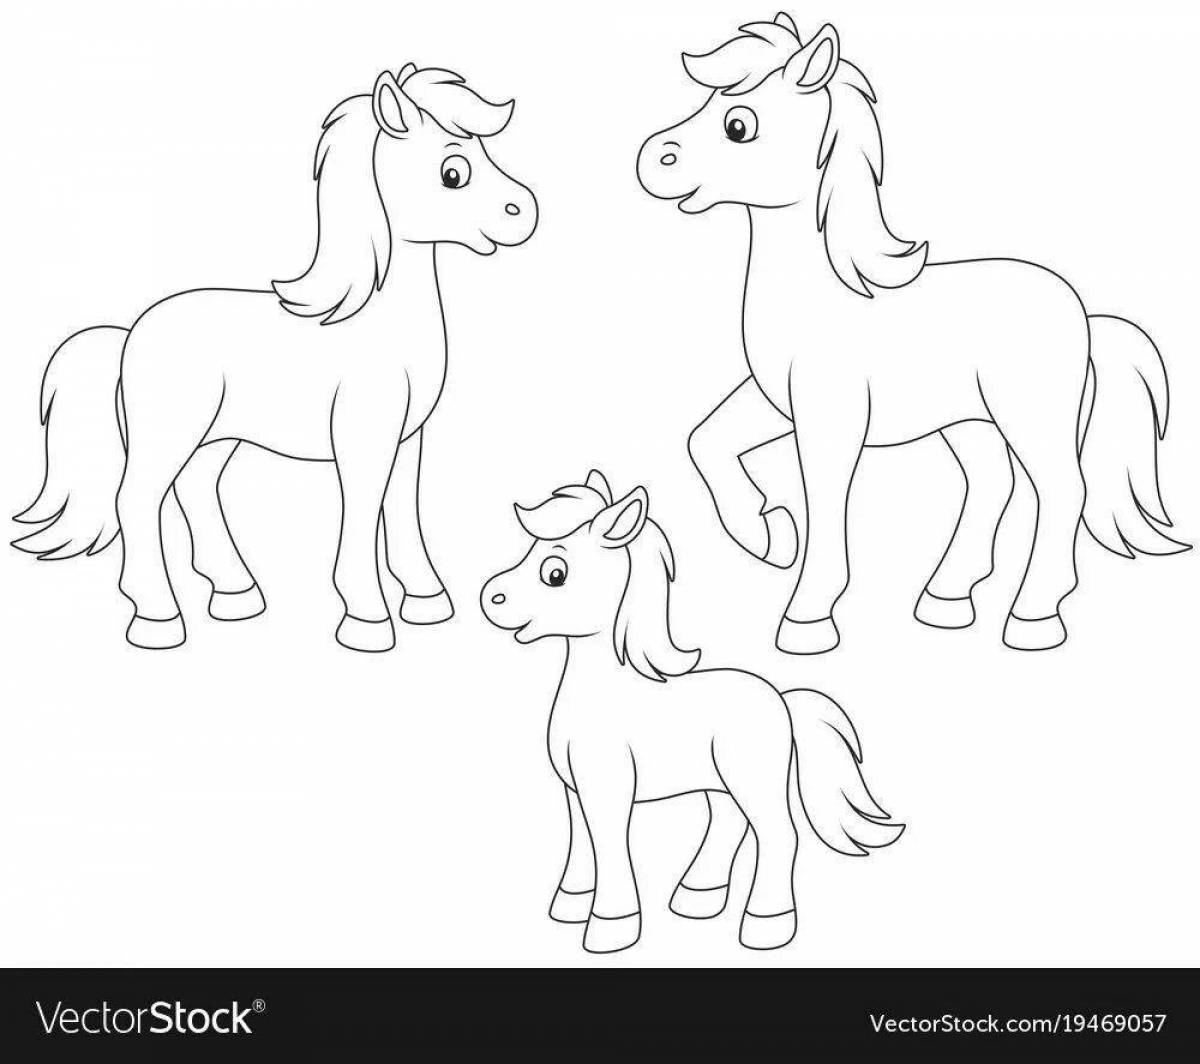 Great horse family coloring book